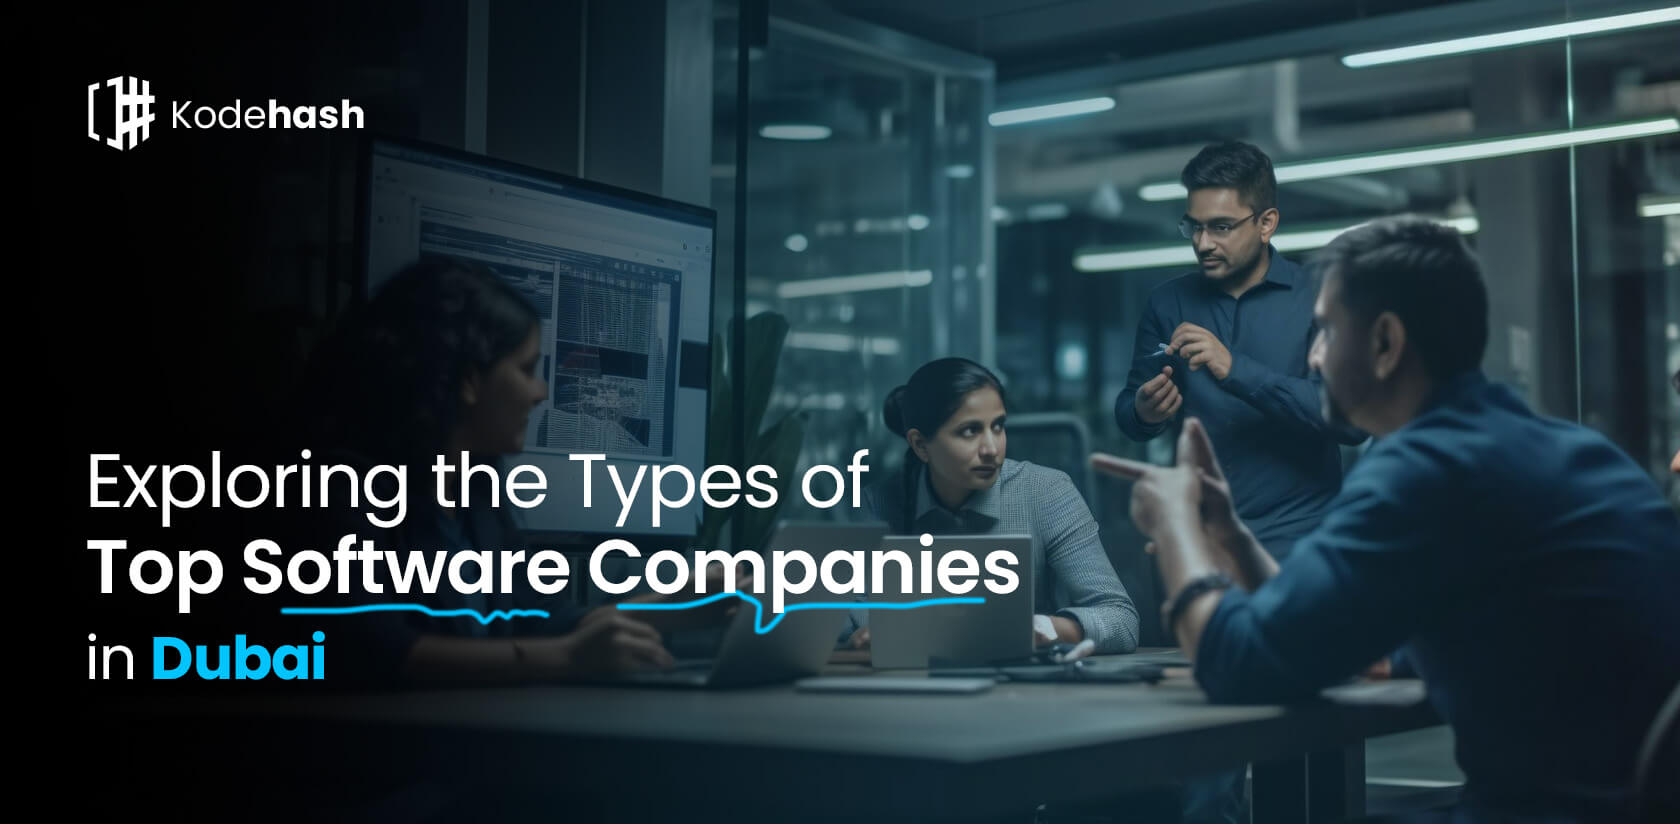 Exploring the Types of Top Software Companies in Dubai